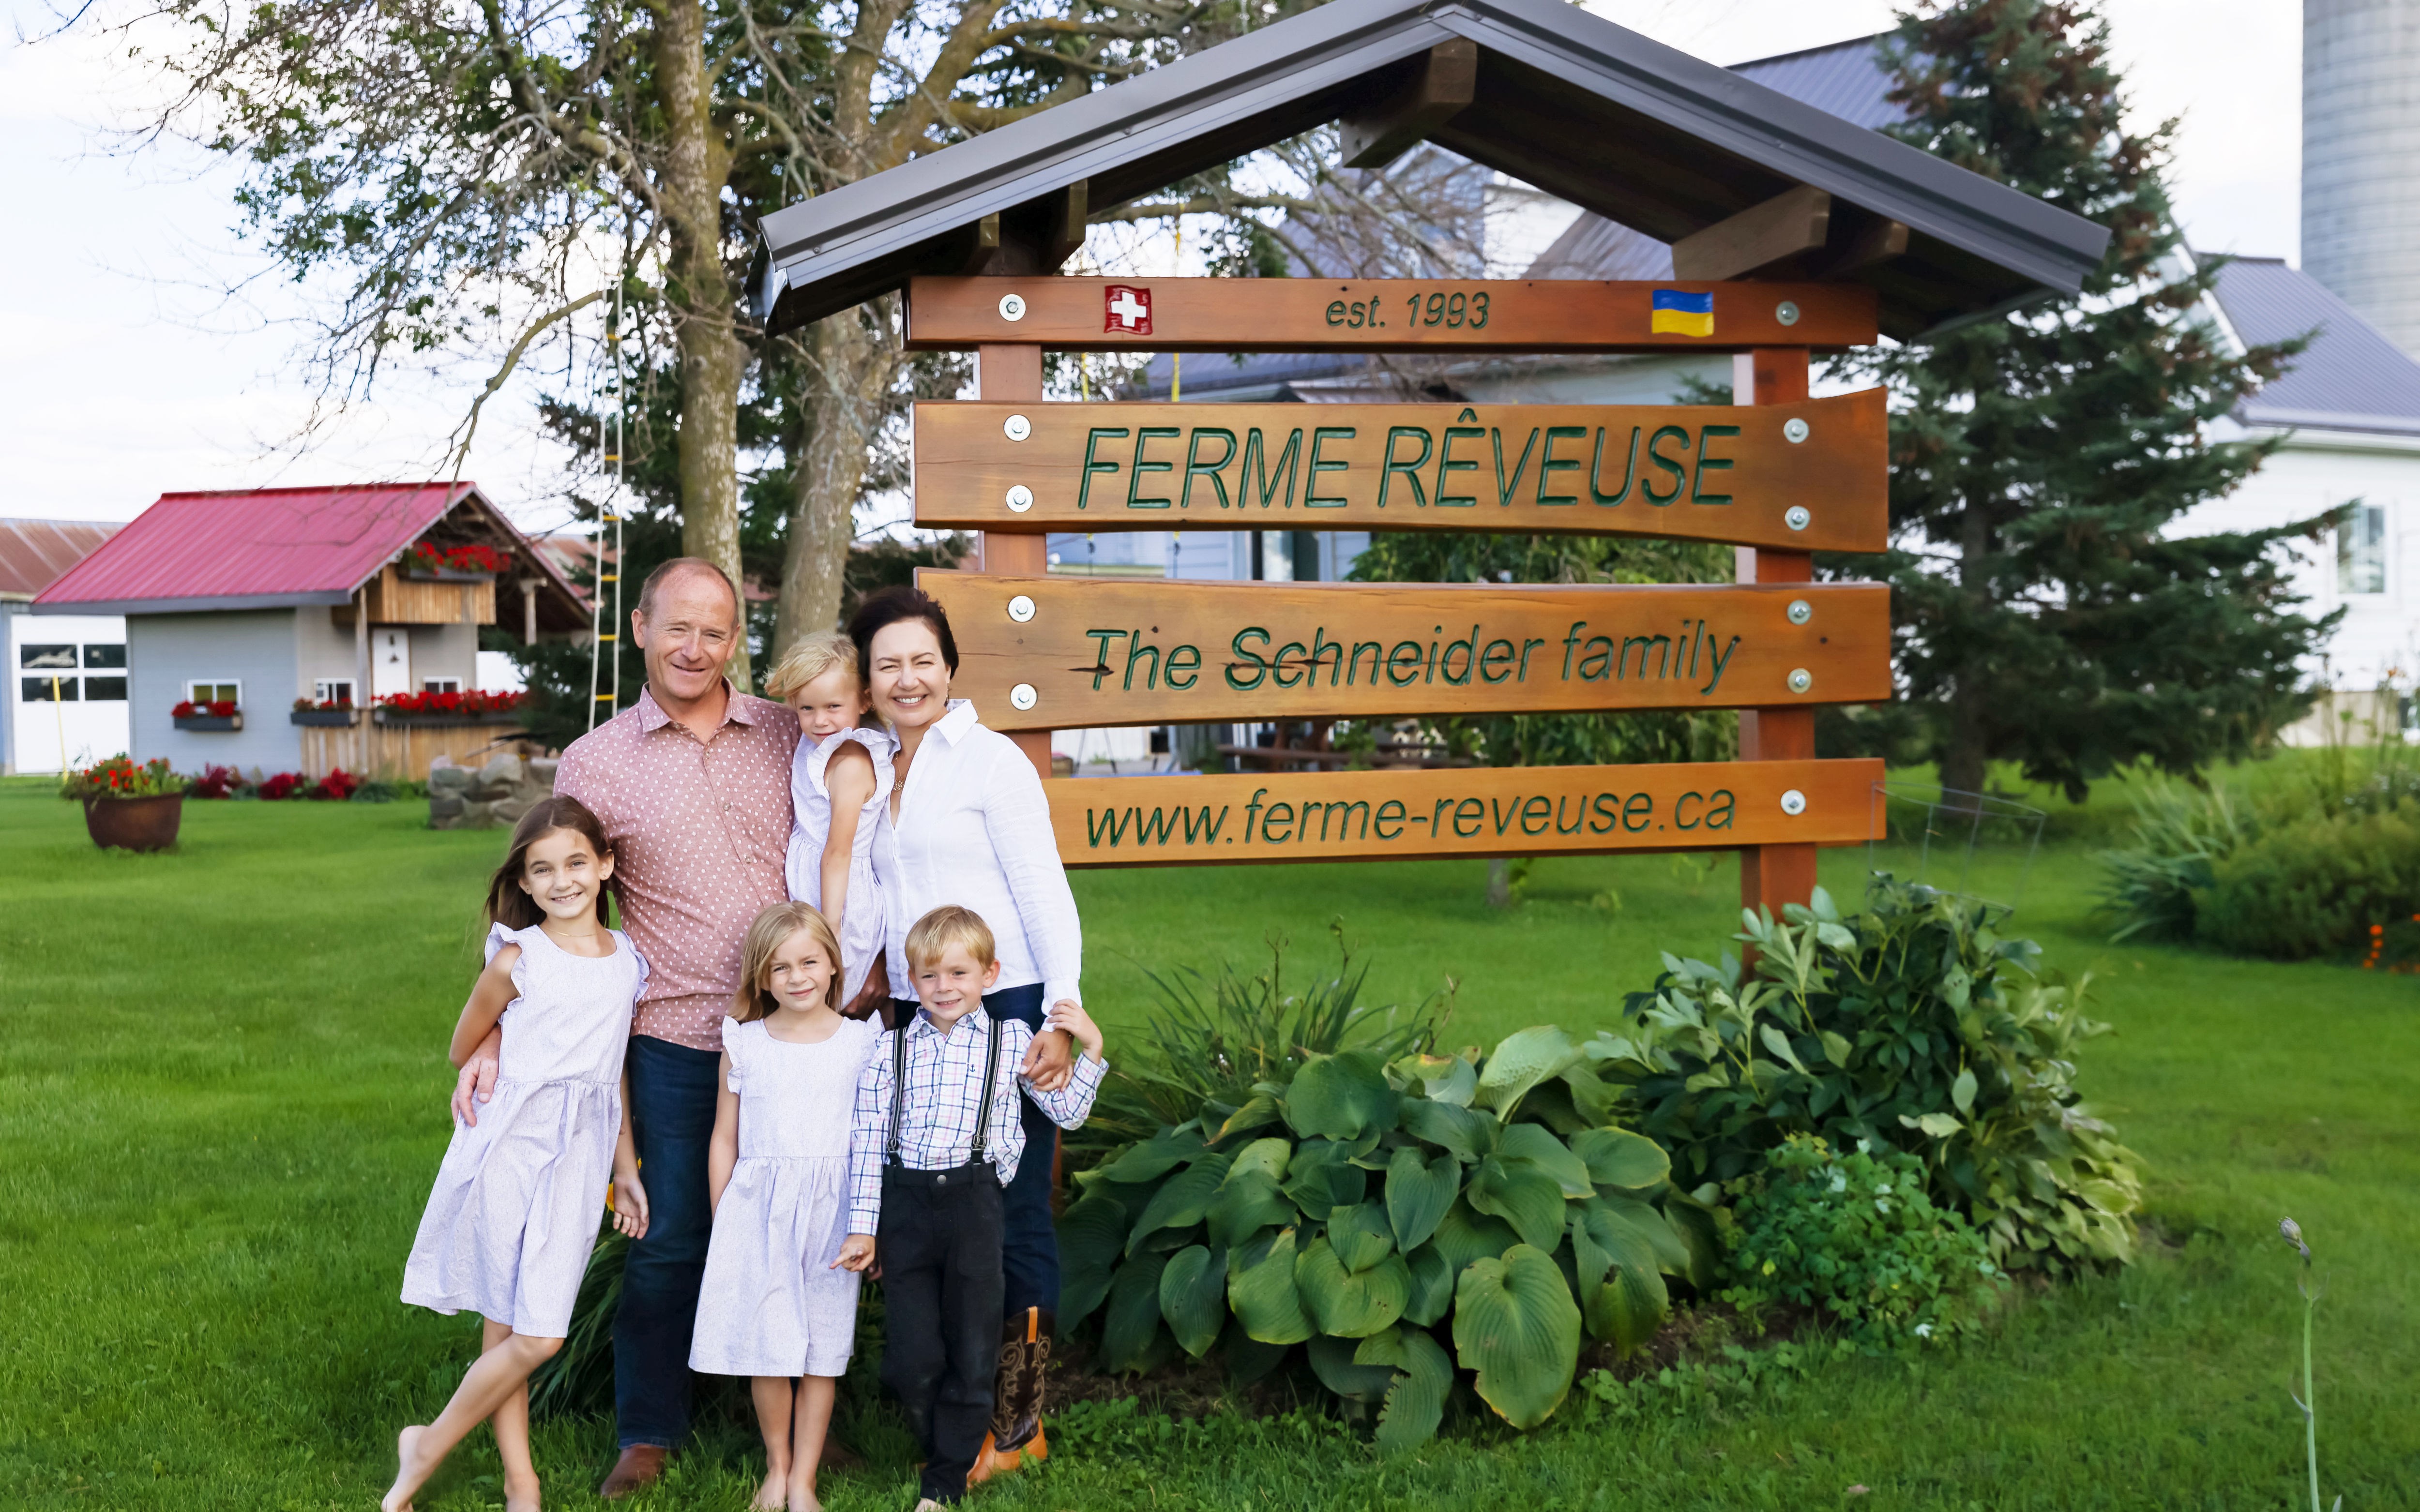 Owners Kornel and Olga Schneider and their four children in front of a wooden sign with the name of their farm, their website, their history and their origins.